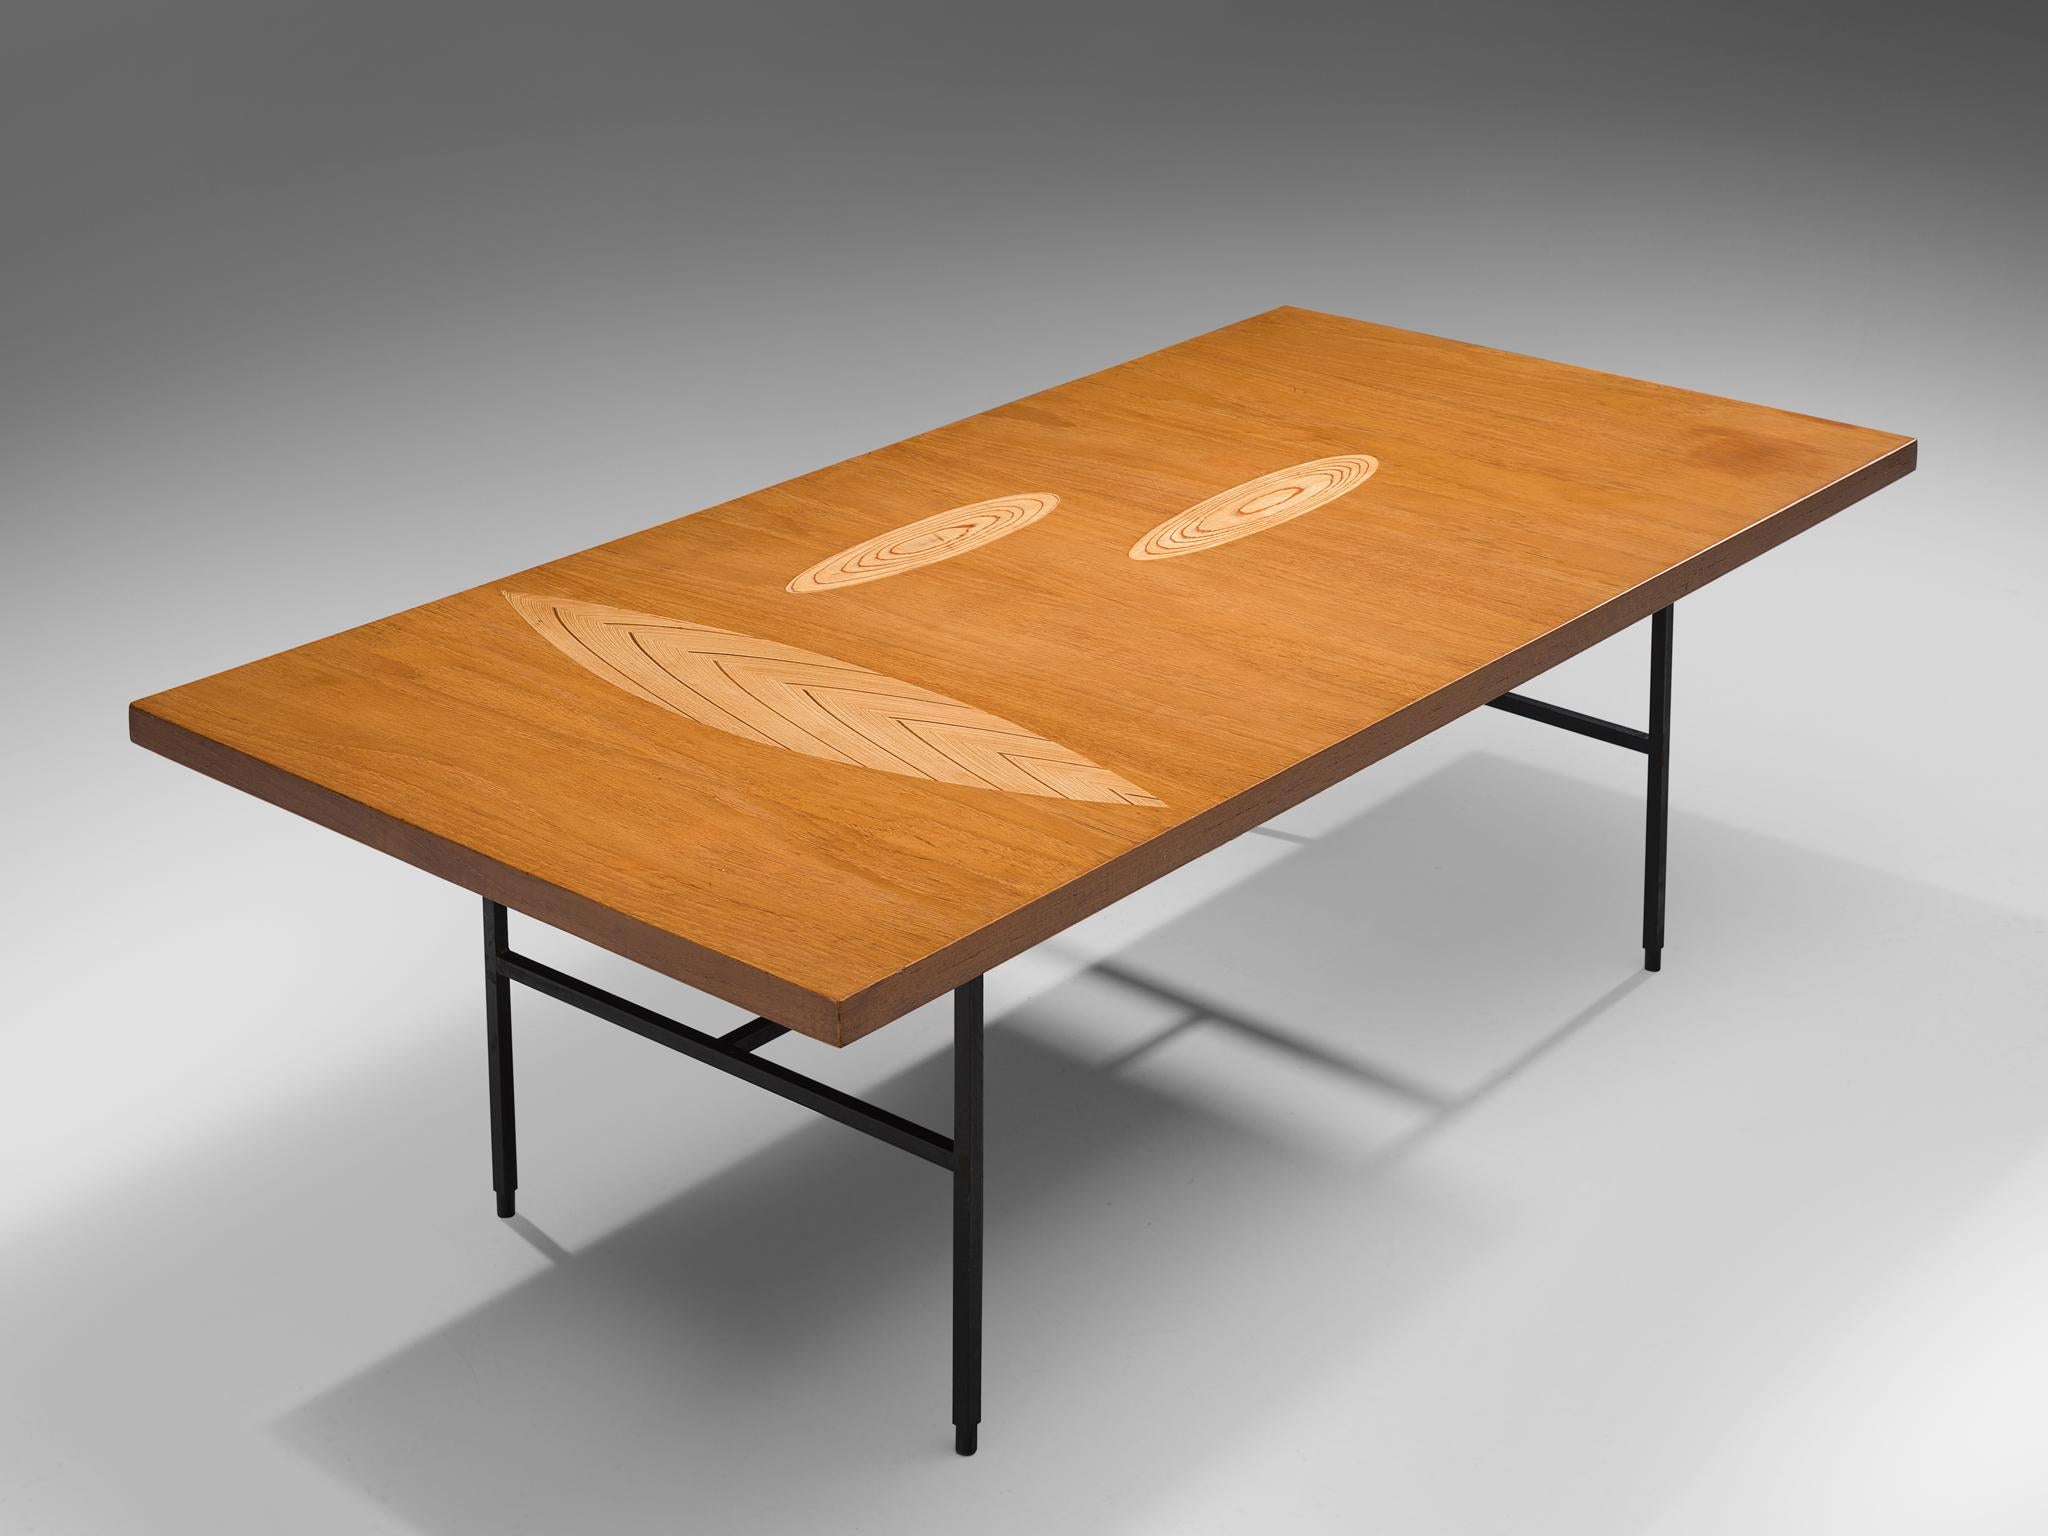 Tapio Wirkkala for Asko, cocktail table, oak, metal, Finland, 1960s.

Coffee table with wooden inlay ornaments designed by Tapio Wirkala. The table is produced by Asko. This coffee table is one of Wirkkala's iconic furniture designs. Made with three